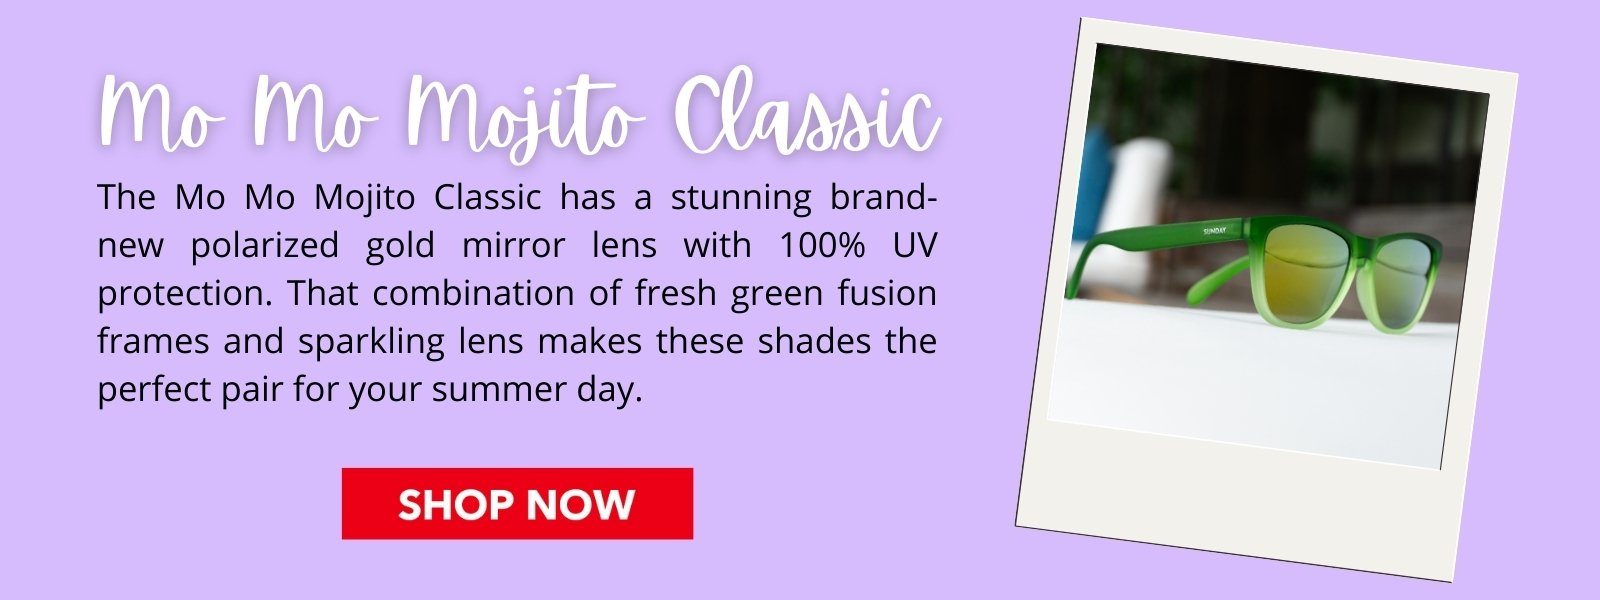 The Mo Mo Mojito Classic has a stunning brand- new polarized gold mirror lens with 100% UV protection. That combination of fresh green fusion frames and sparkling lens makes these shades the perfect pair for your summer day. 